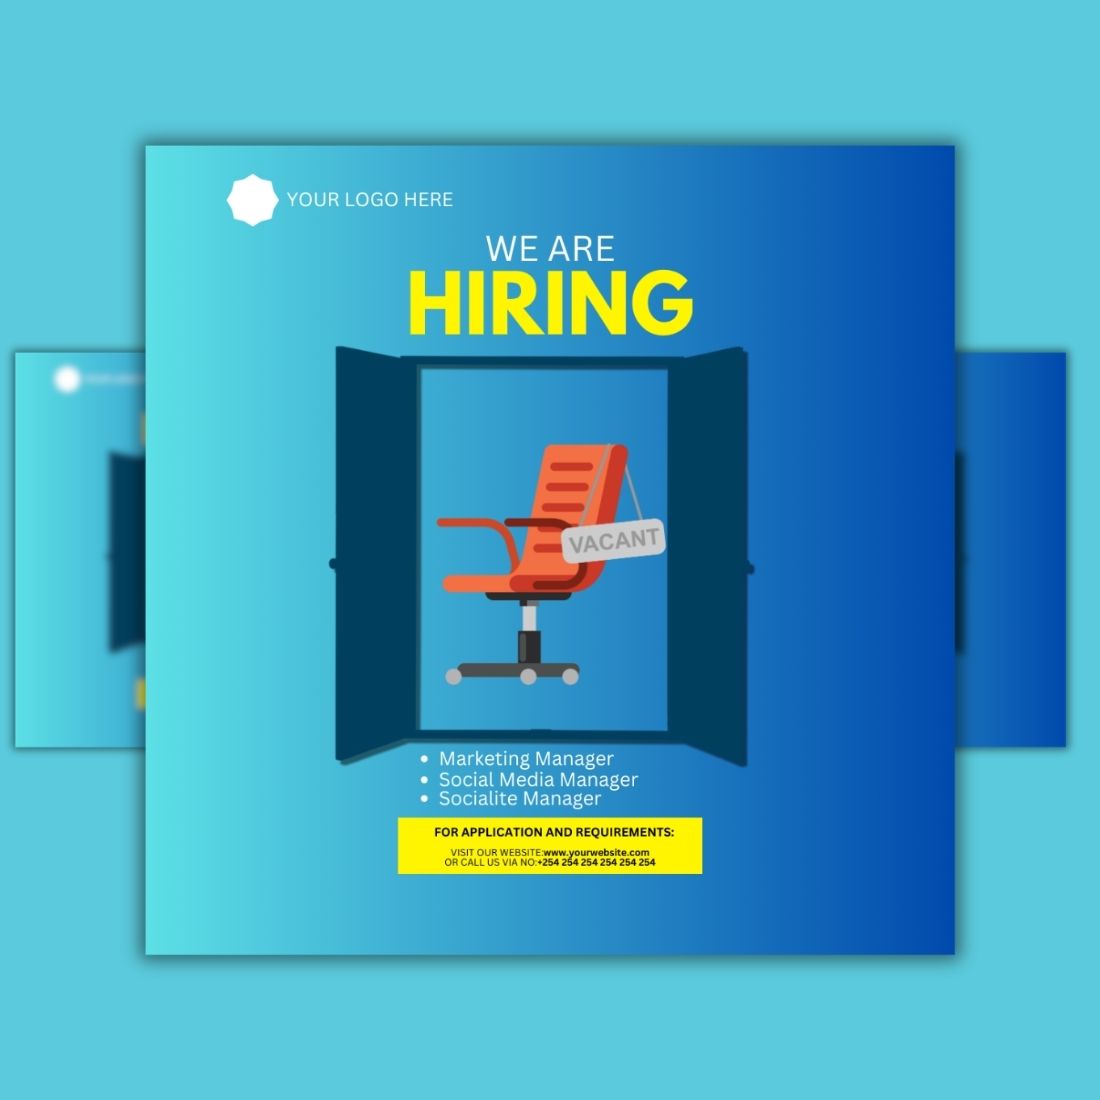 1 Instagram Sized Canva Hiring Design Template - $4 preview image.